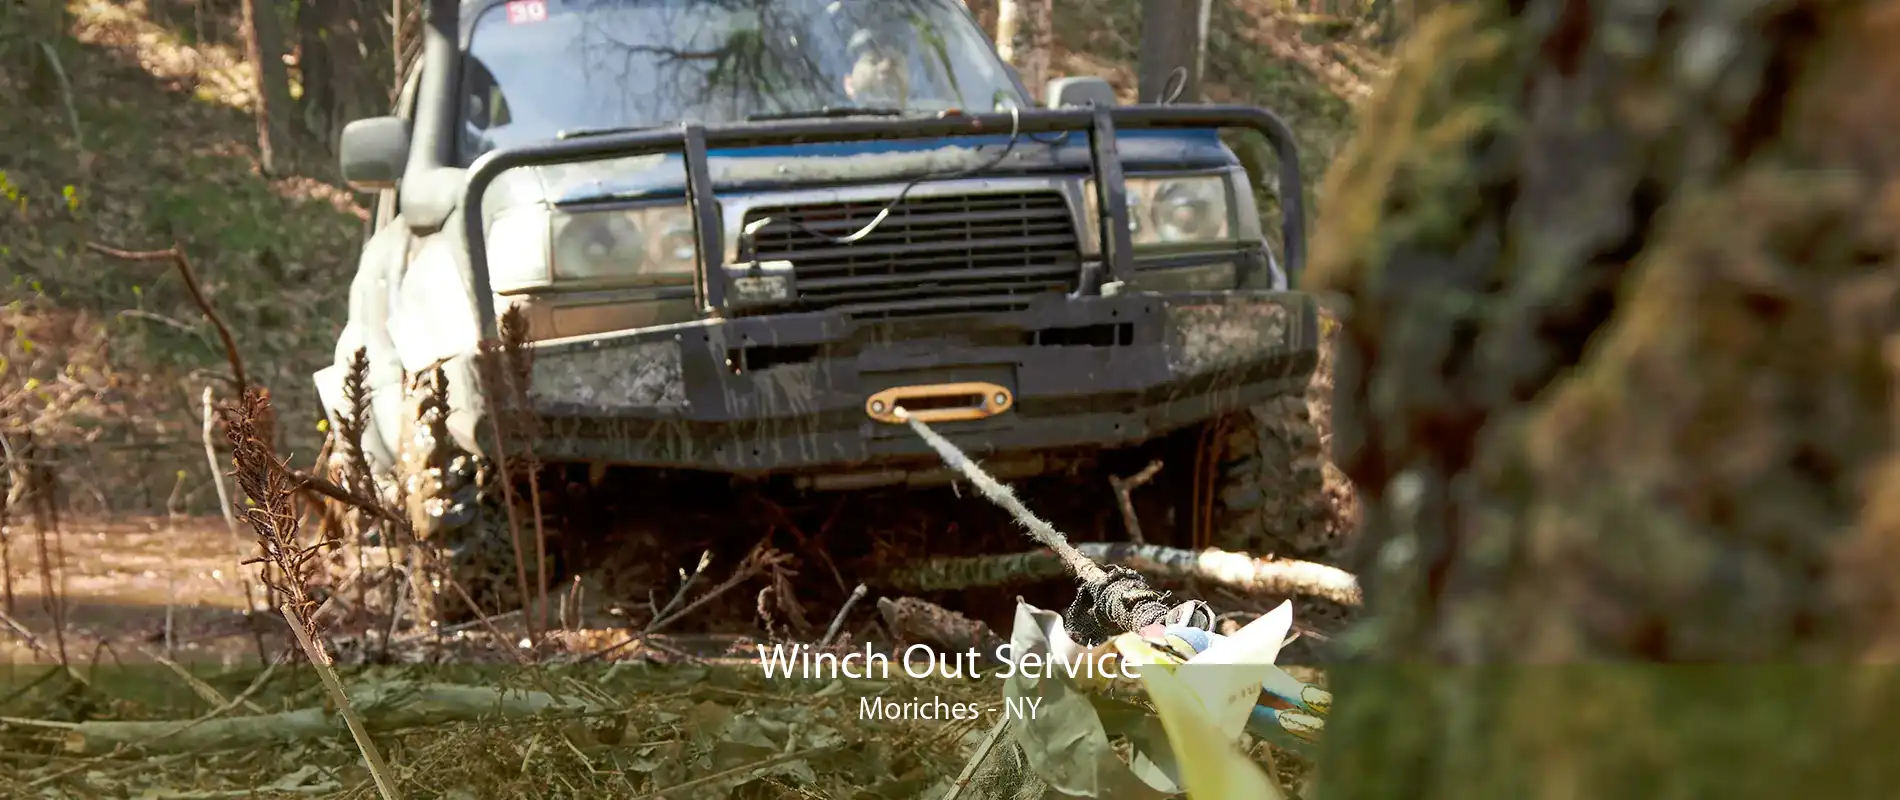 Winch Out Service Moriches - NY